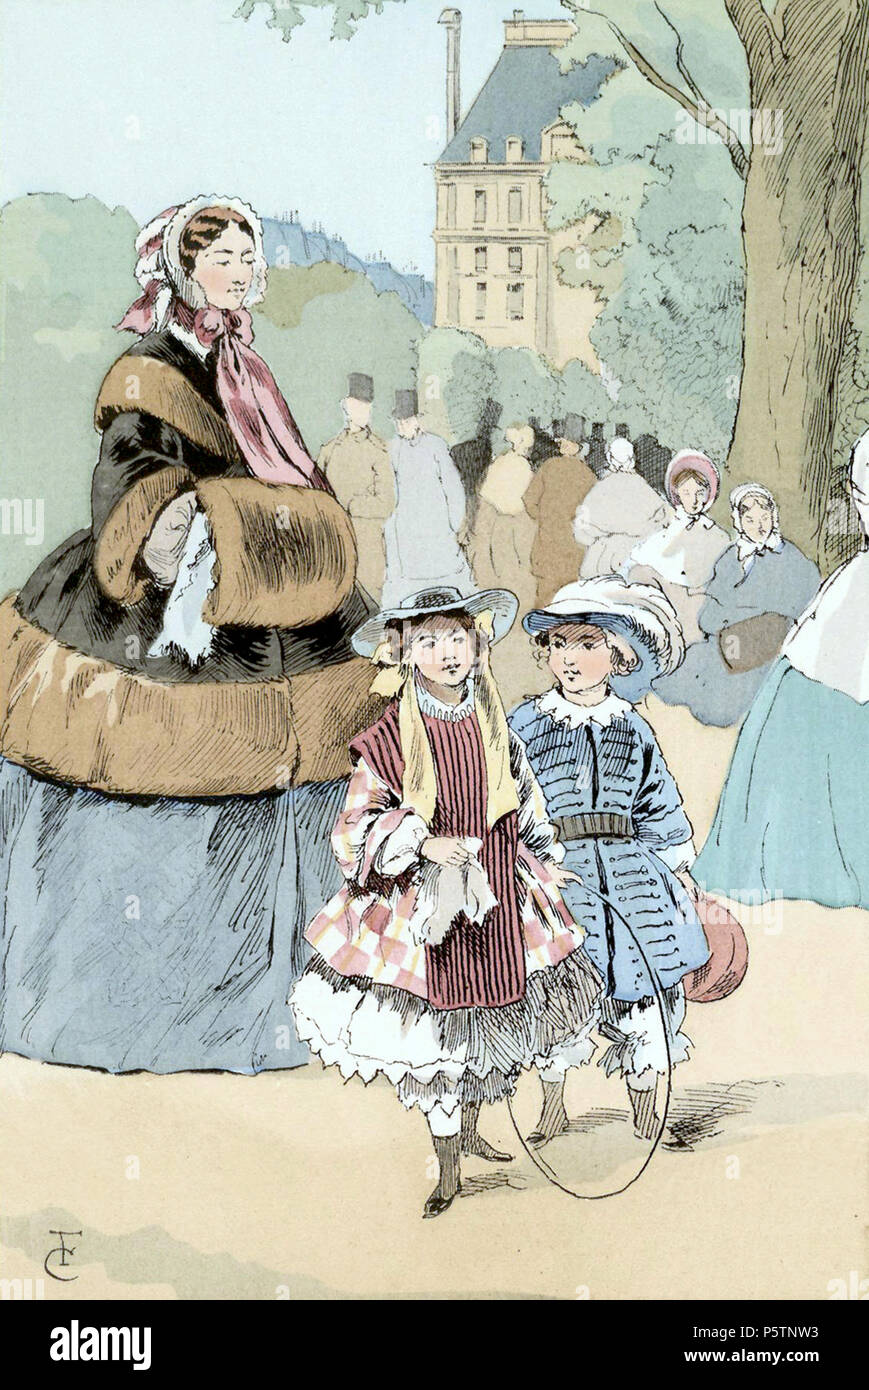 Children in the Tuileries Gardens, 1859 . The woman in this plate wears a dress with a wide crinoline and a 'manteau impératrice' or Algerian burnous in fur. Her hair is fashioned in plaits close to her head and is revealed by her bonnet. The girl on the left wears a shortened version of a crinoline skirt with white pantalettes that emerge from her skirt, similar to women's attire of the era. Her hat has a wide brim and is adorned with a ribbon. The boy wears ballooning pants, a 'Russian' blouse with a soft, wide collar underneath a fairly structured 'skeleton' jacket. Abstract sources: Bouche Stock Photo